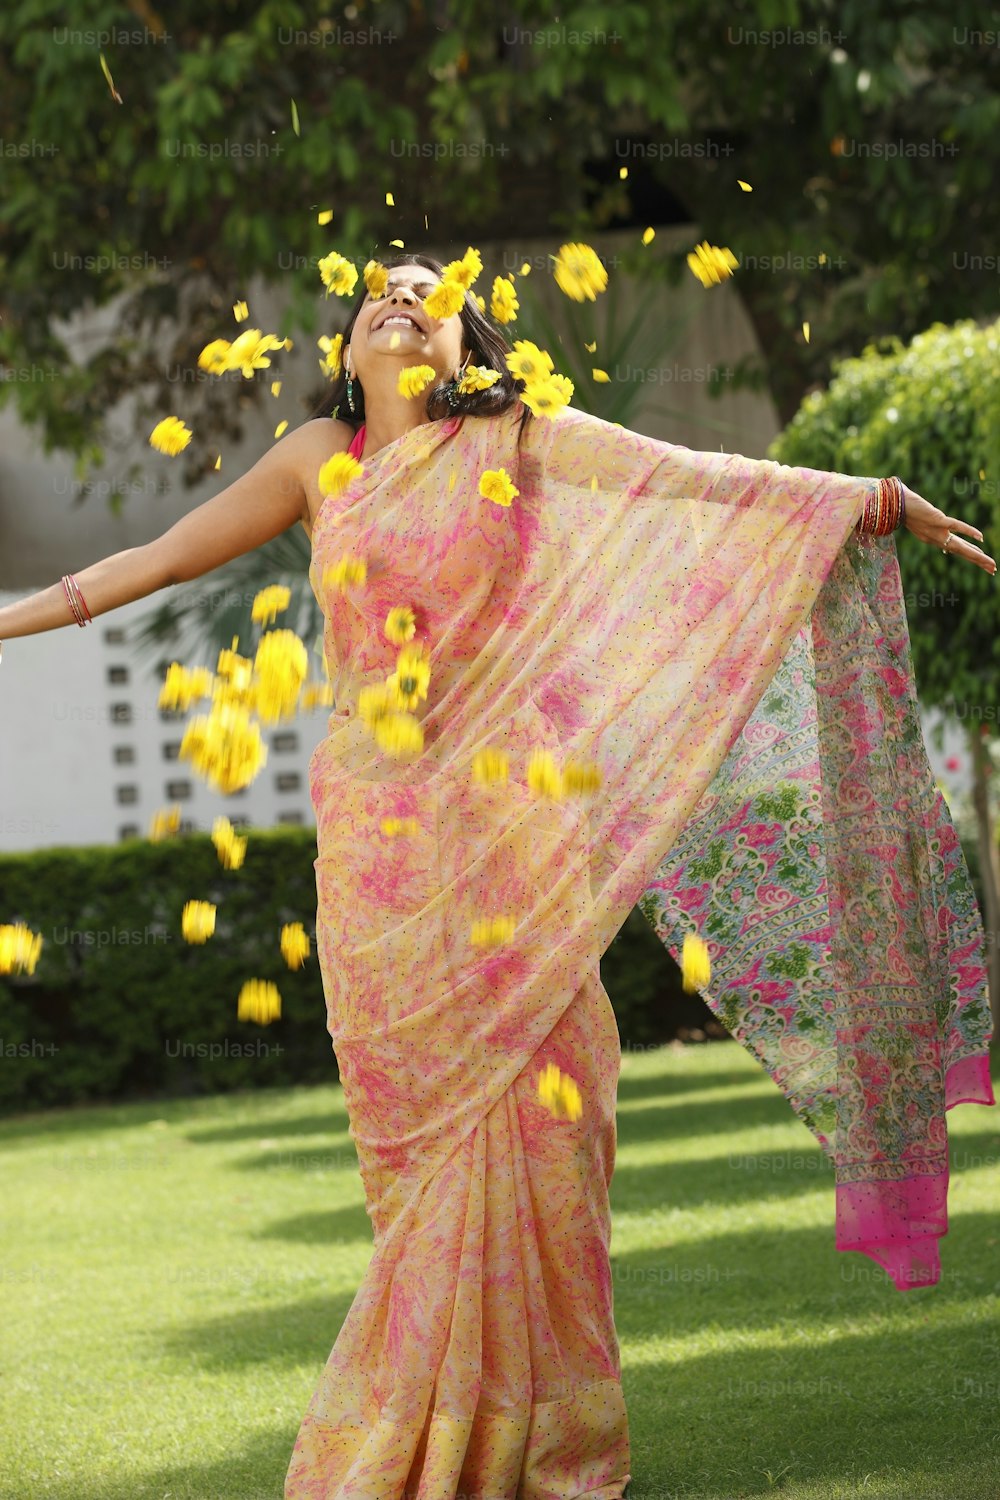 a woman in a sari throwing flowers in the air